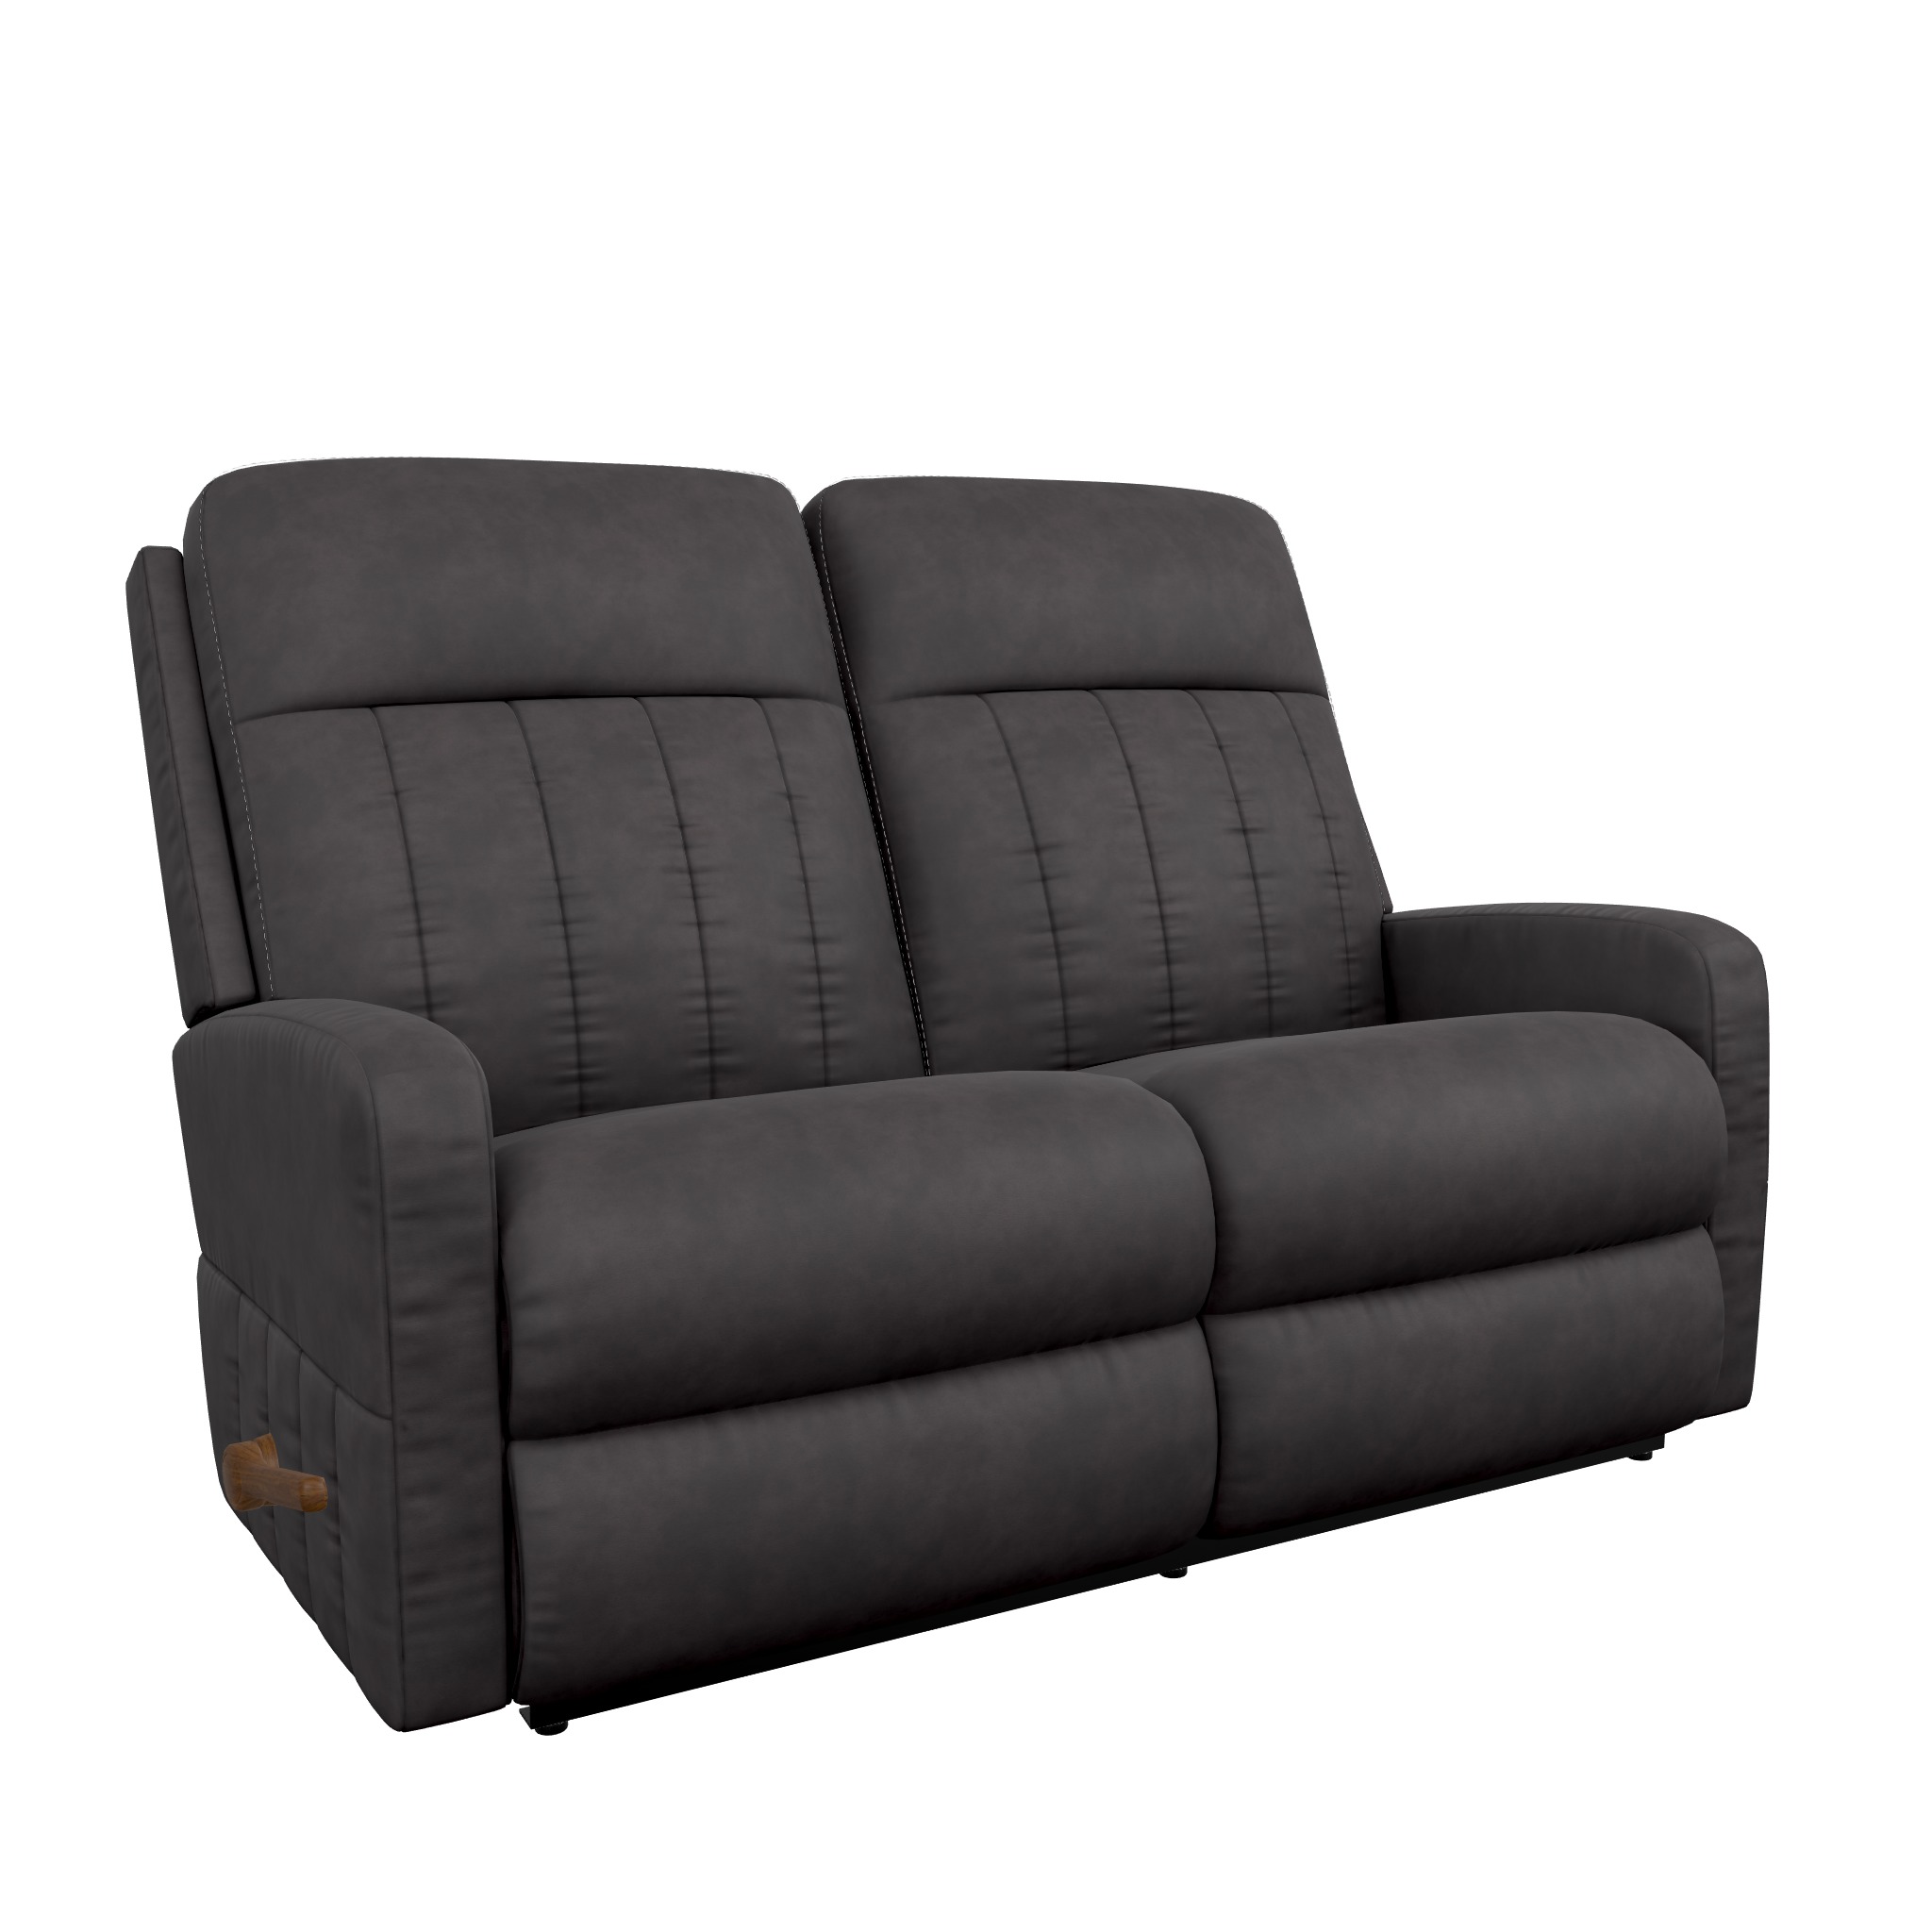 Image - 1 - Finley Leather Full Reclining Loveseat